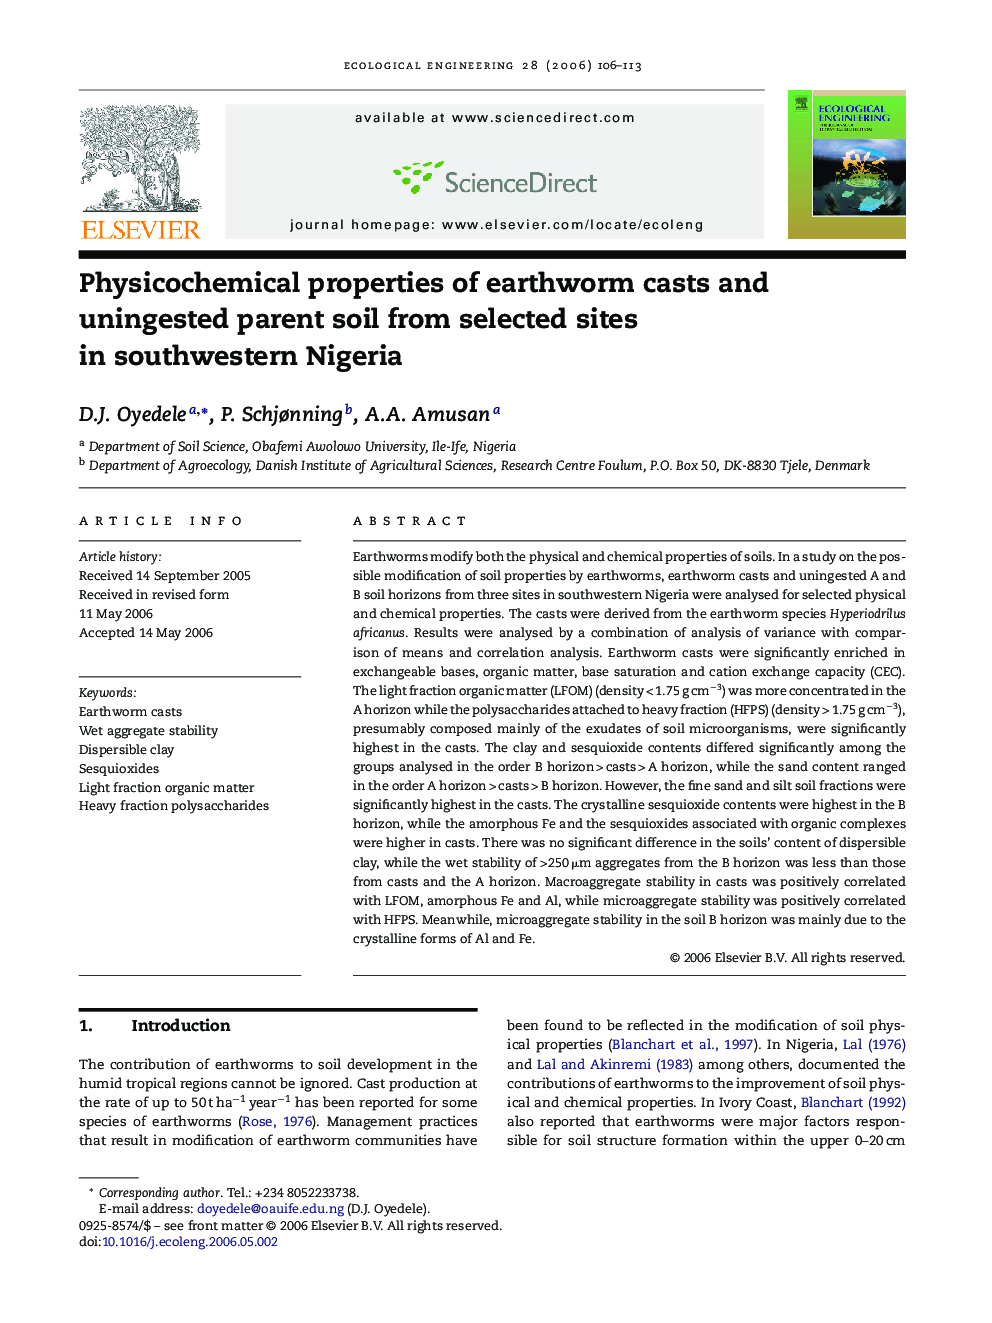 Physicochemical properties of earthworm casts and uningested parent soil from selected sites in southwestern Nigeria